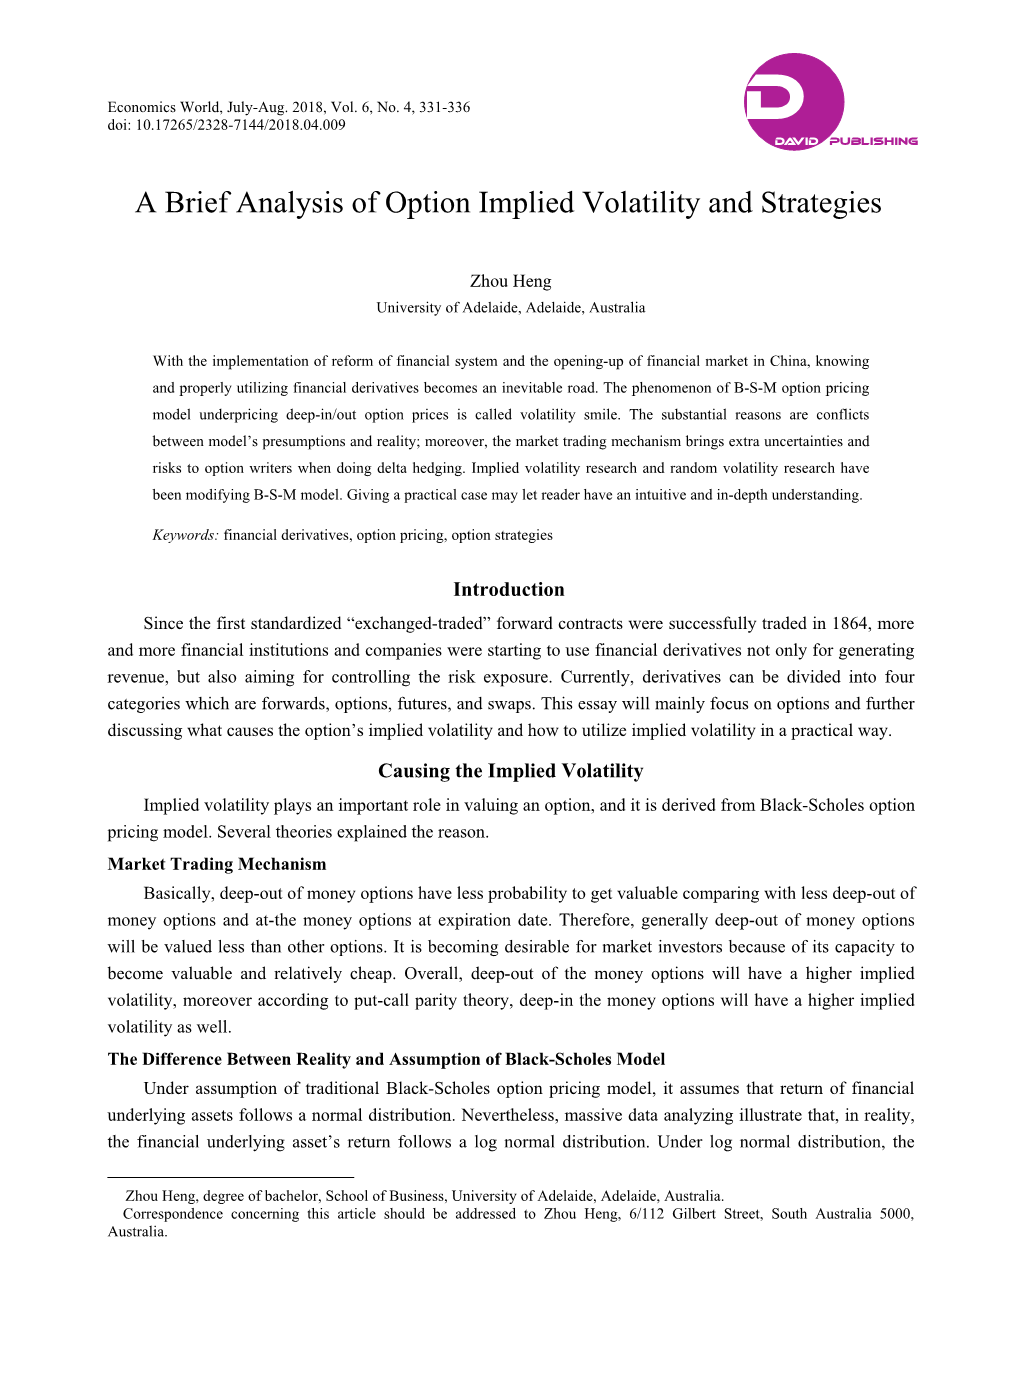 A Brief Analysis of Option Implied Volatility and Strategies